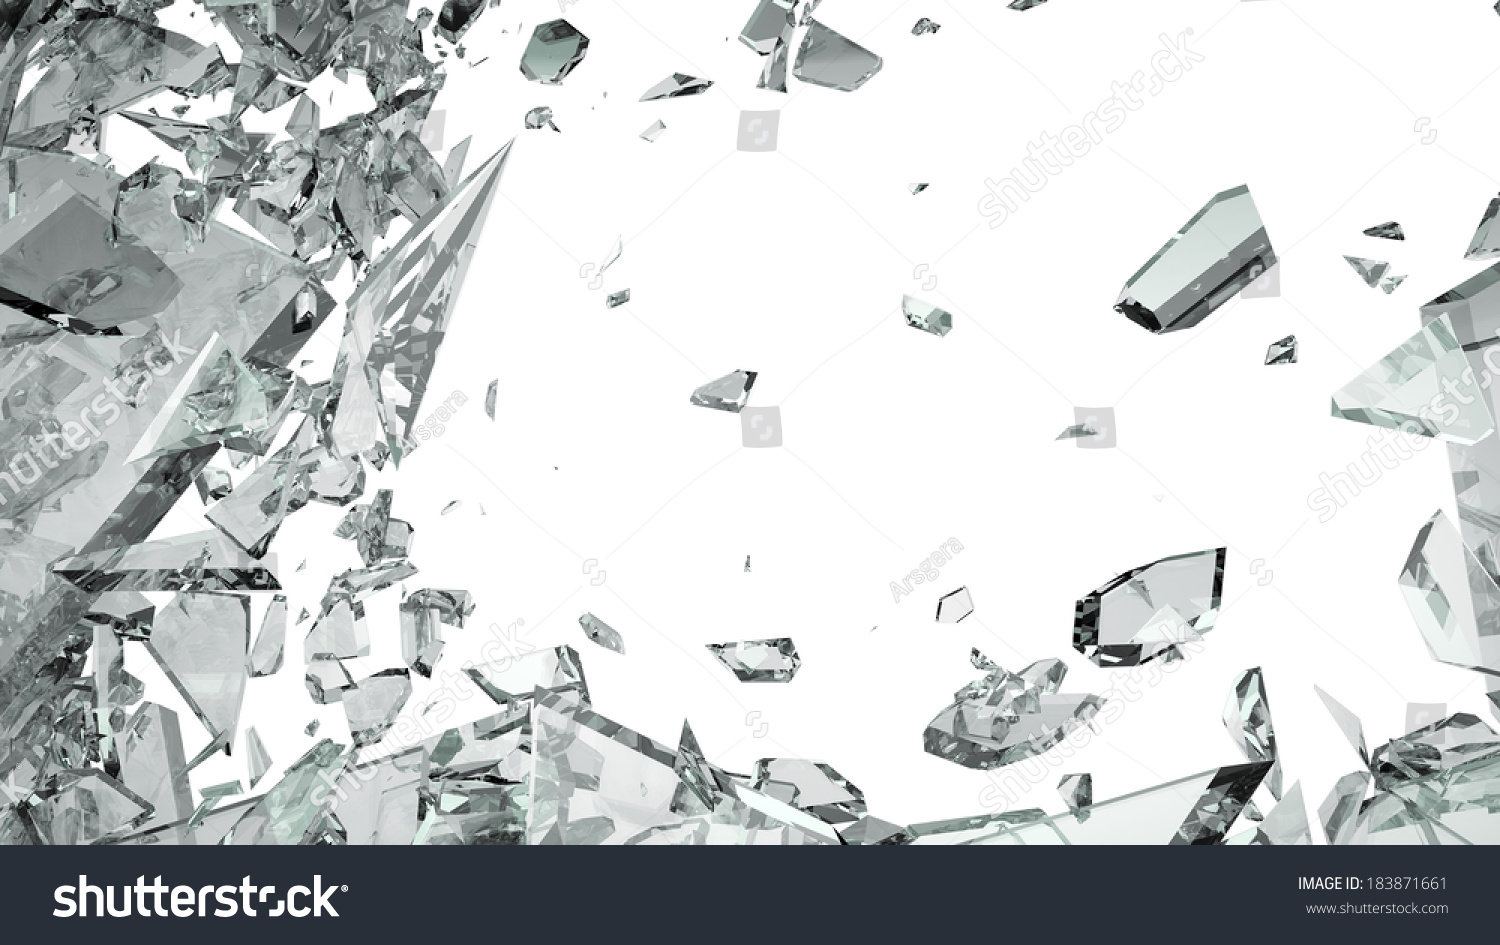 Pieces of shattered glass isolated on white. Large size #183871661